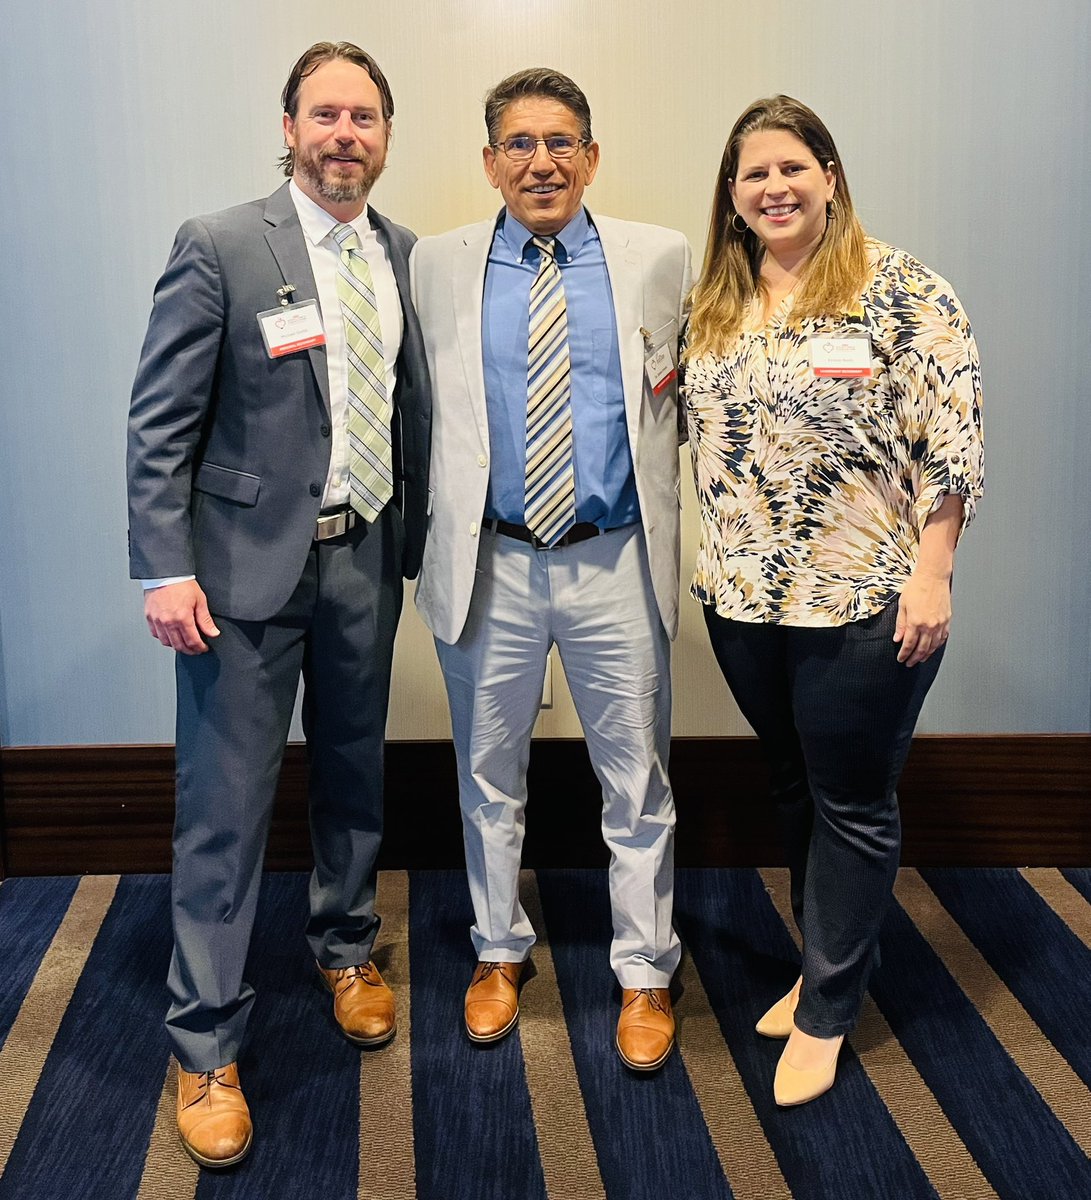 Over the weekend Dr. Flores joined our two @HEBexcellence finalists Michael Grebb and Kirsten Nash at the H-E-B awards banquet! 🏅 Congratulations to these amazing educators, this is an amazing achievement 👏🏼 #Pfamily @stevefloresTX